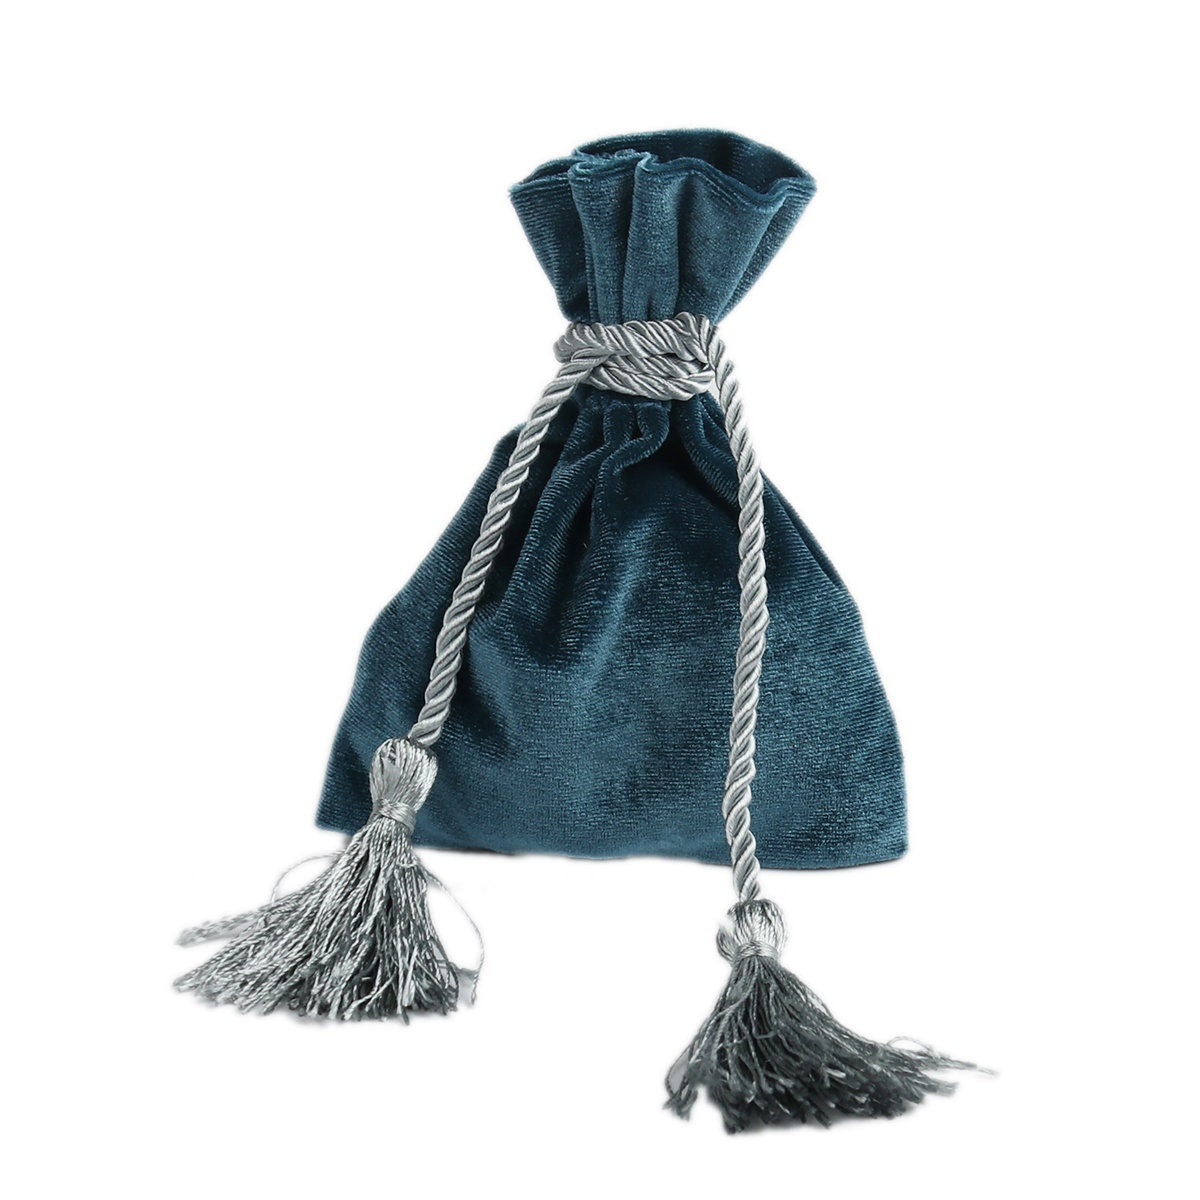 Velvet pouch bag with tassel rope - Choose your color - Witchcraft supplies, dice bag, gift wrap, favour bag